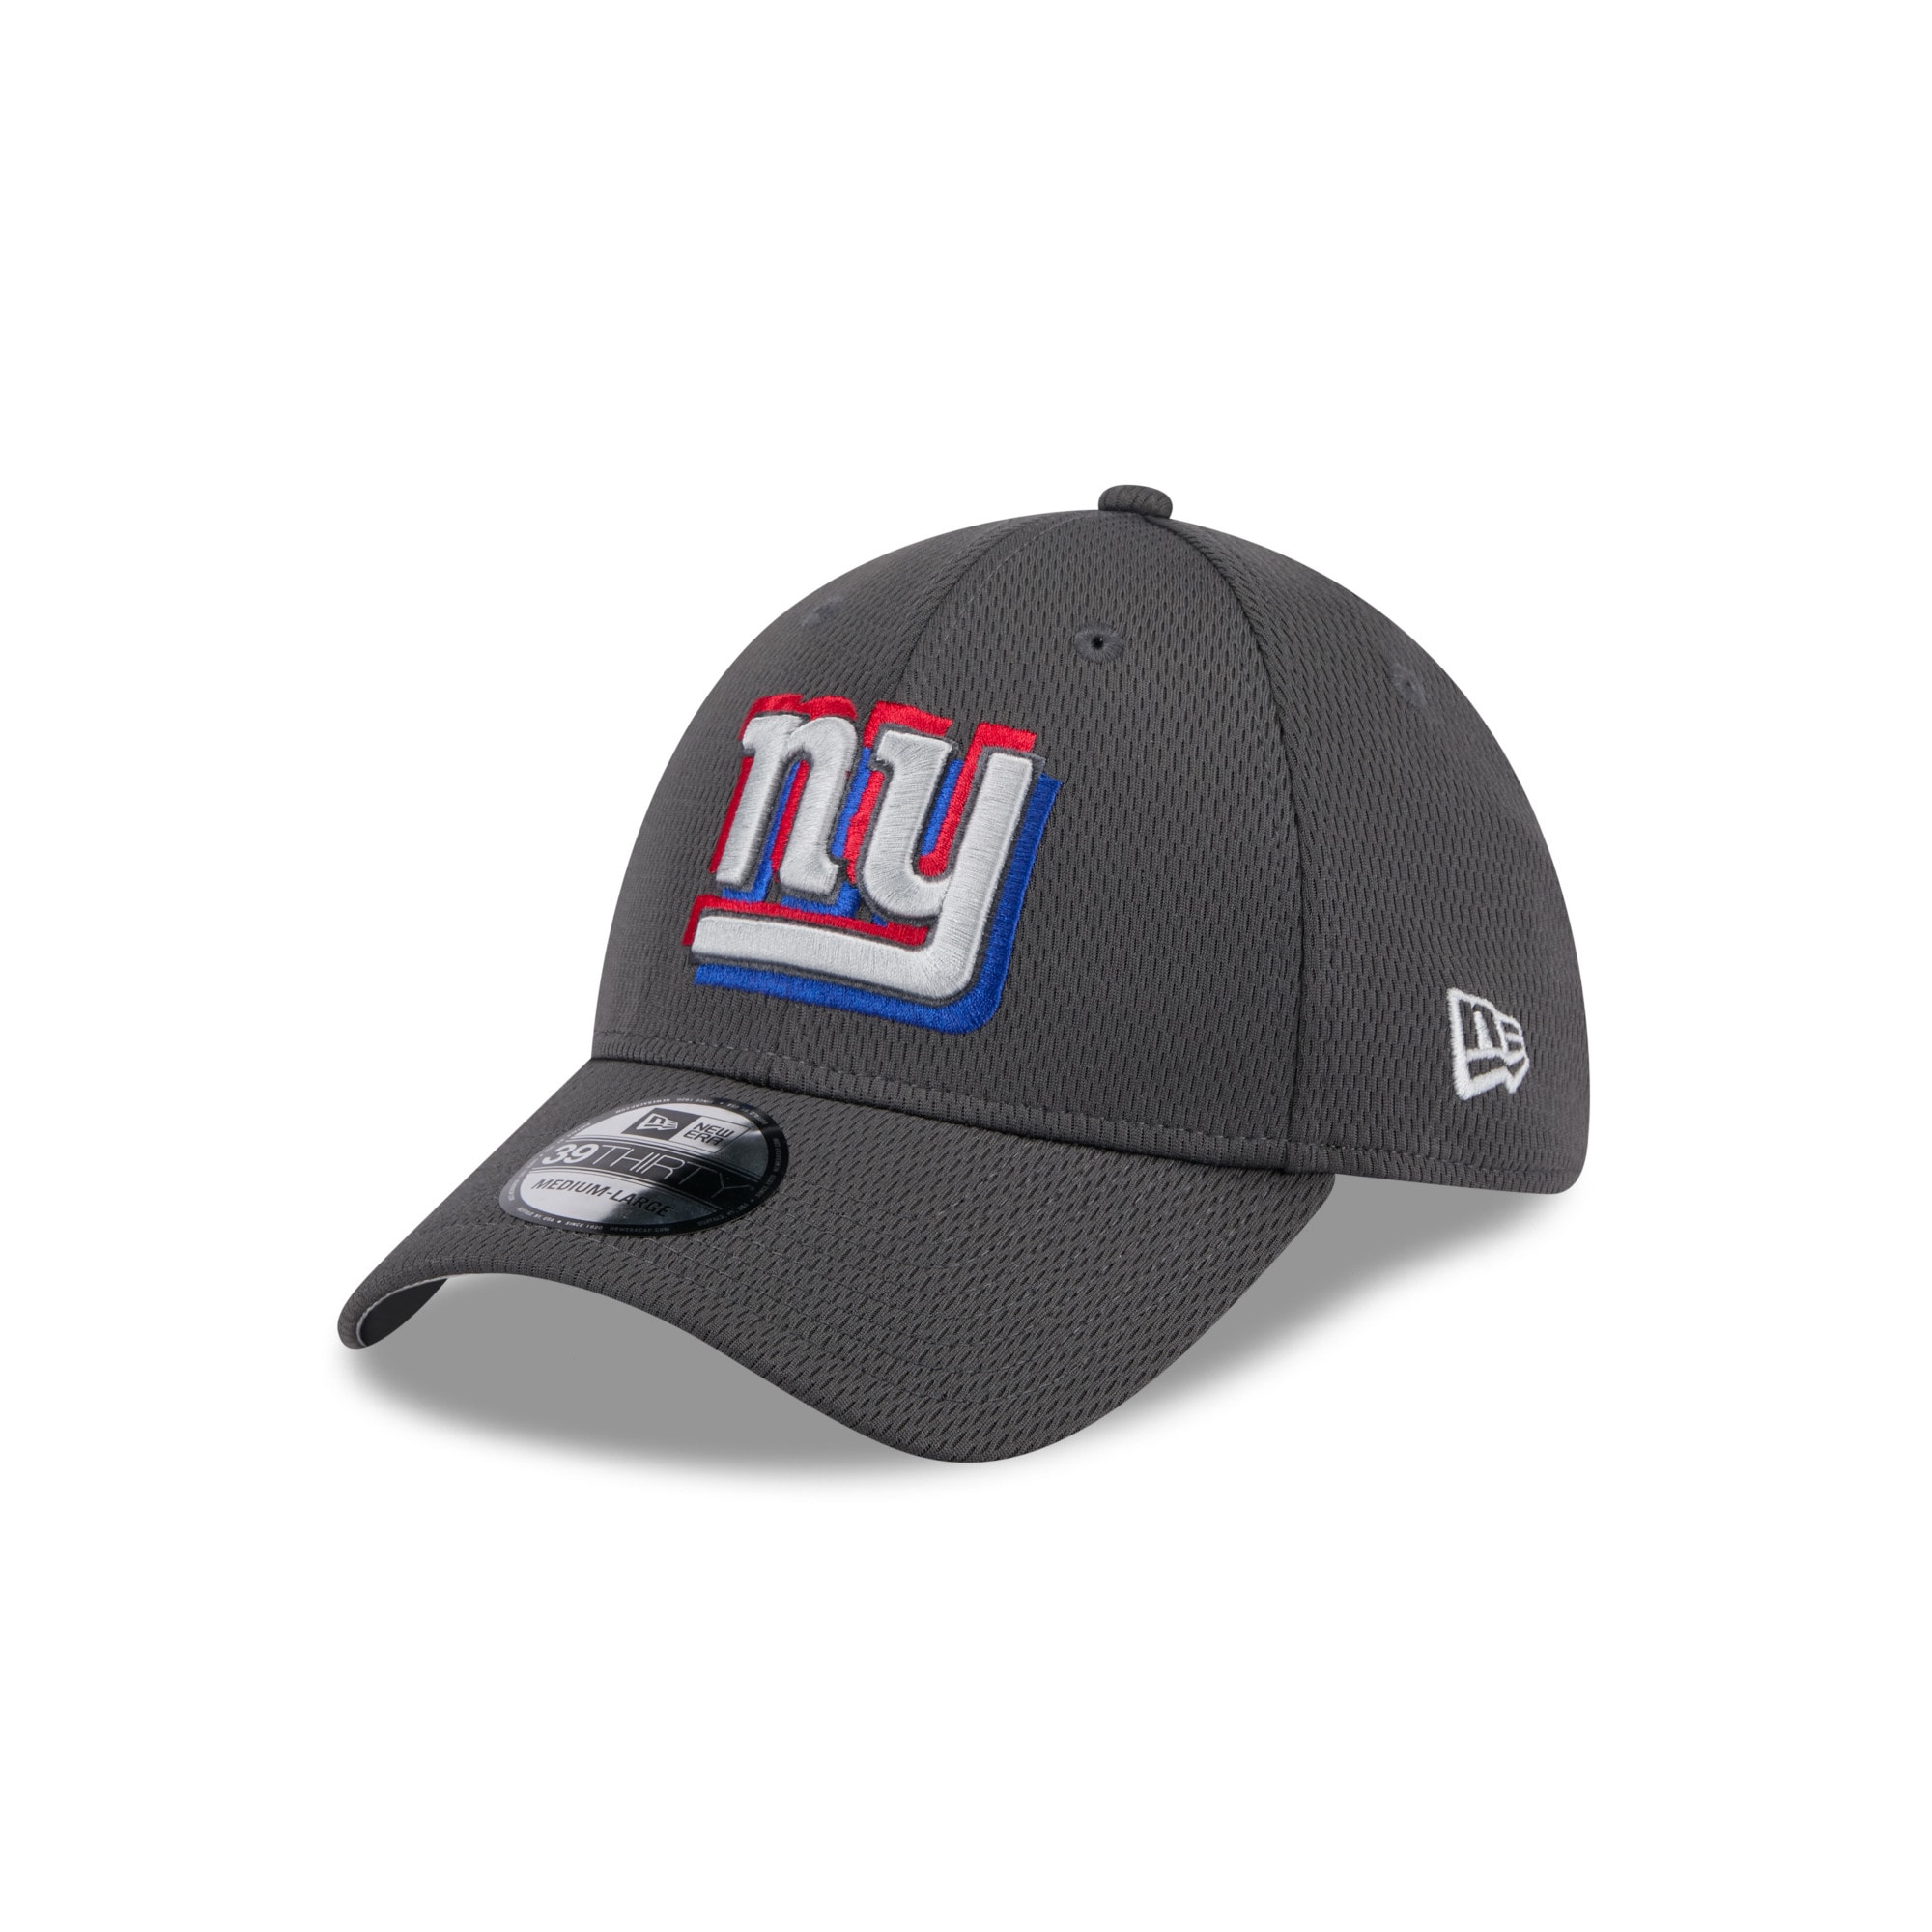 New york giants hats to Elevate Your Game Day Style插图4